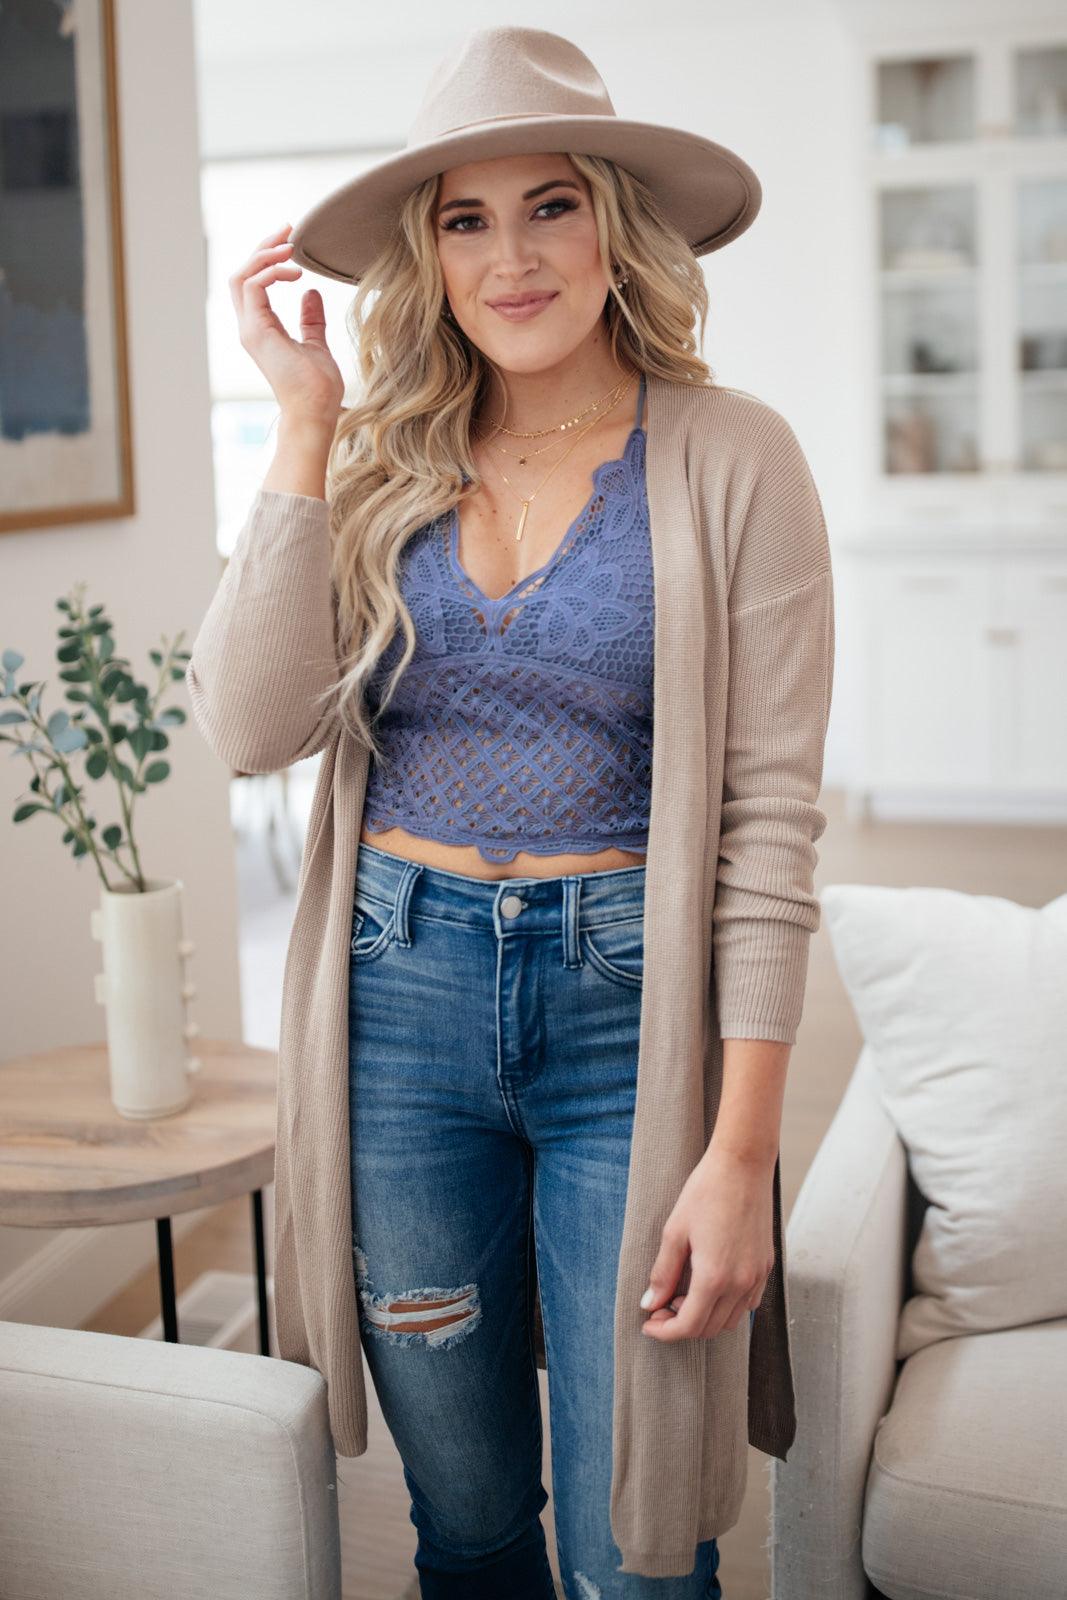 Wild And Free Crop Top in Dusty Blue - The Fiery Jasmine